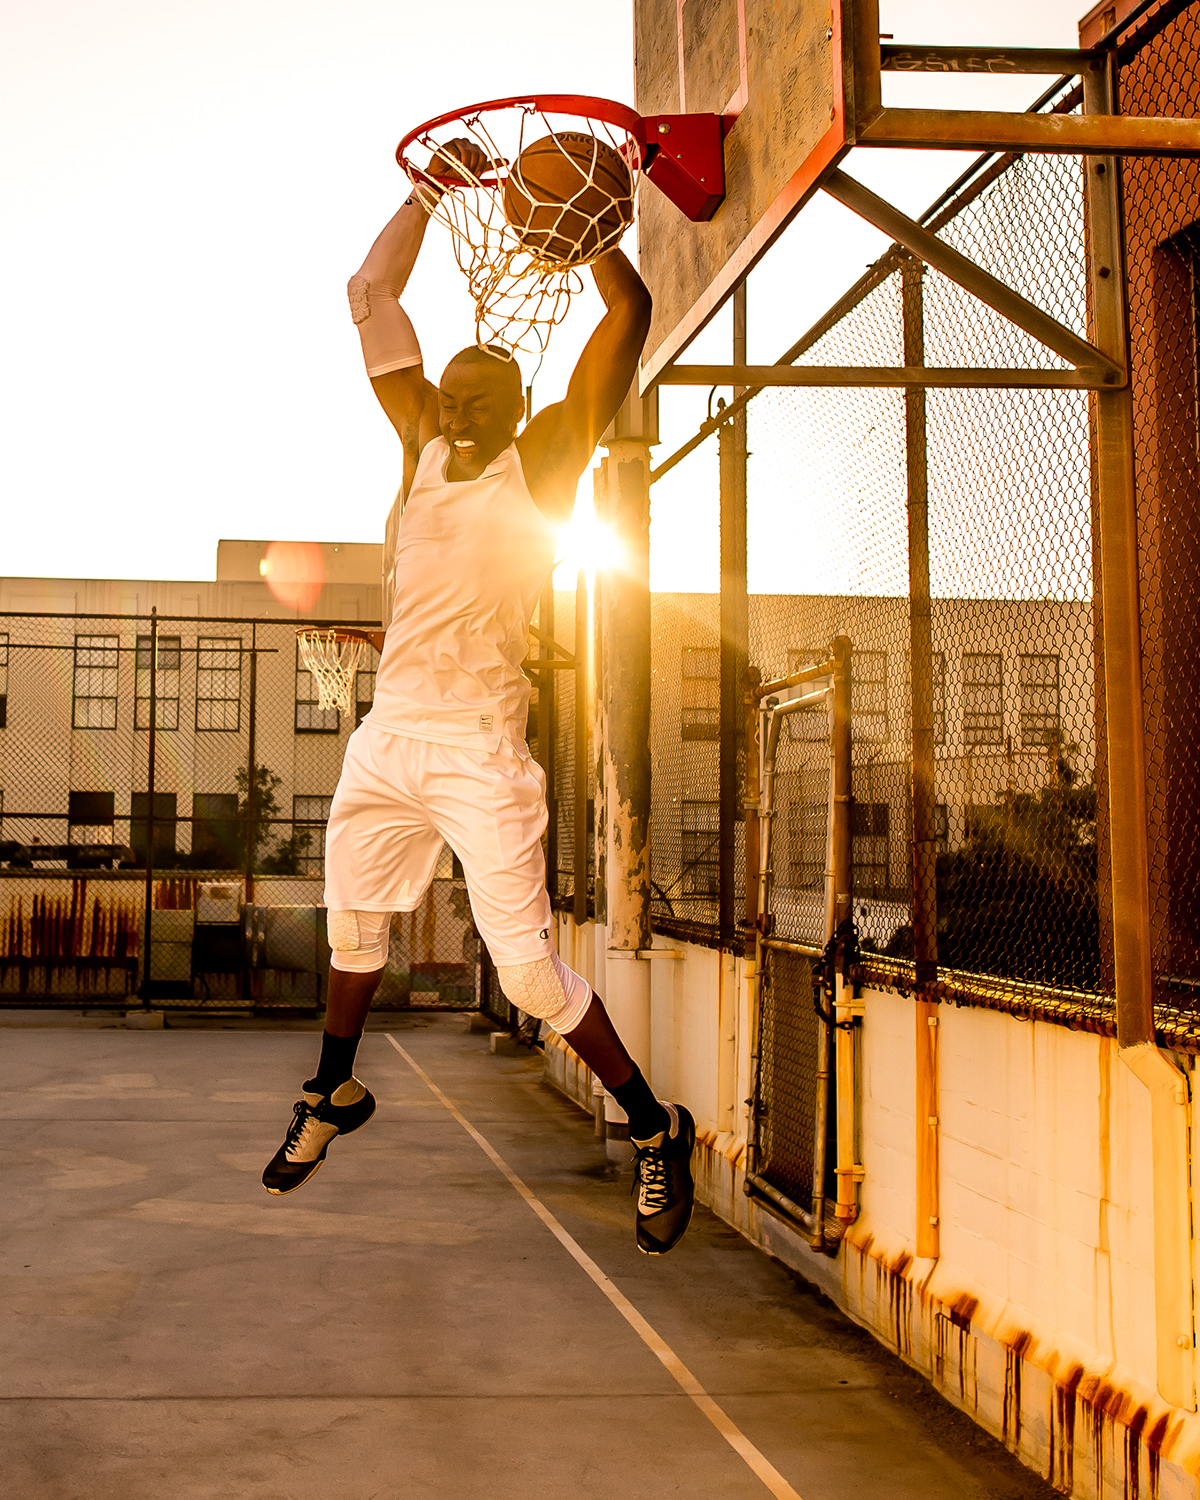 basketball NBA Cousins Street sport sports action Los Angeles roof sunset sweat Outdoor court